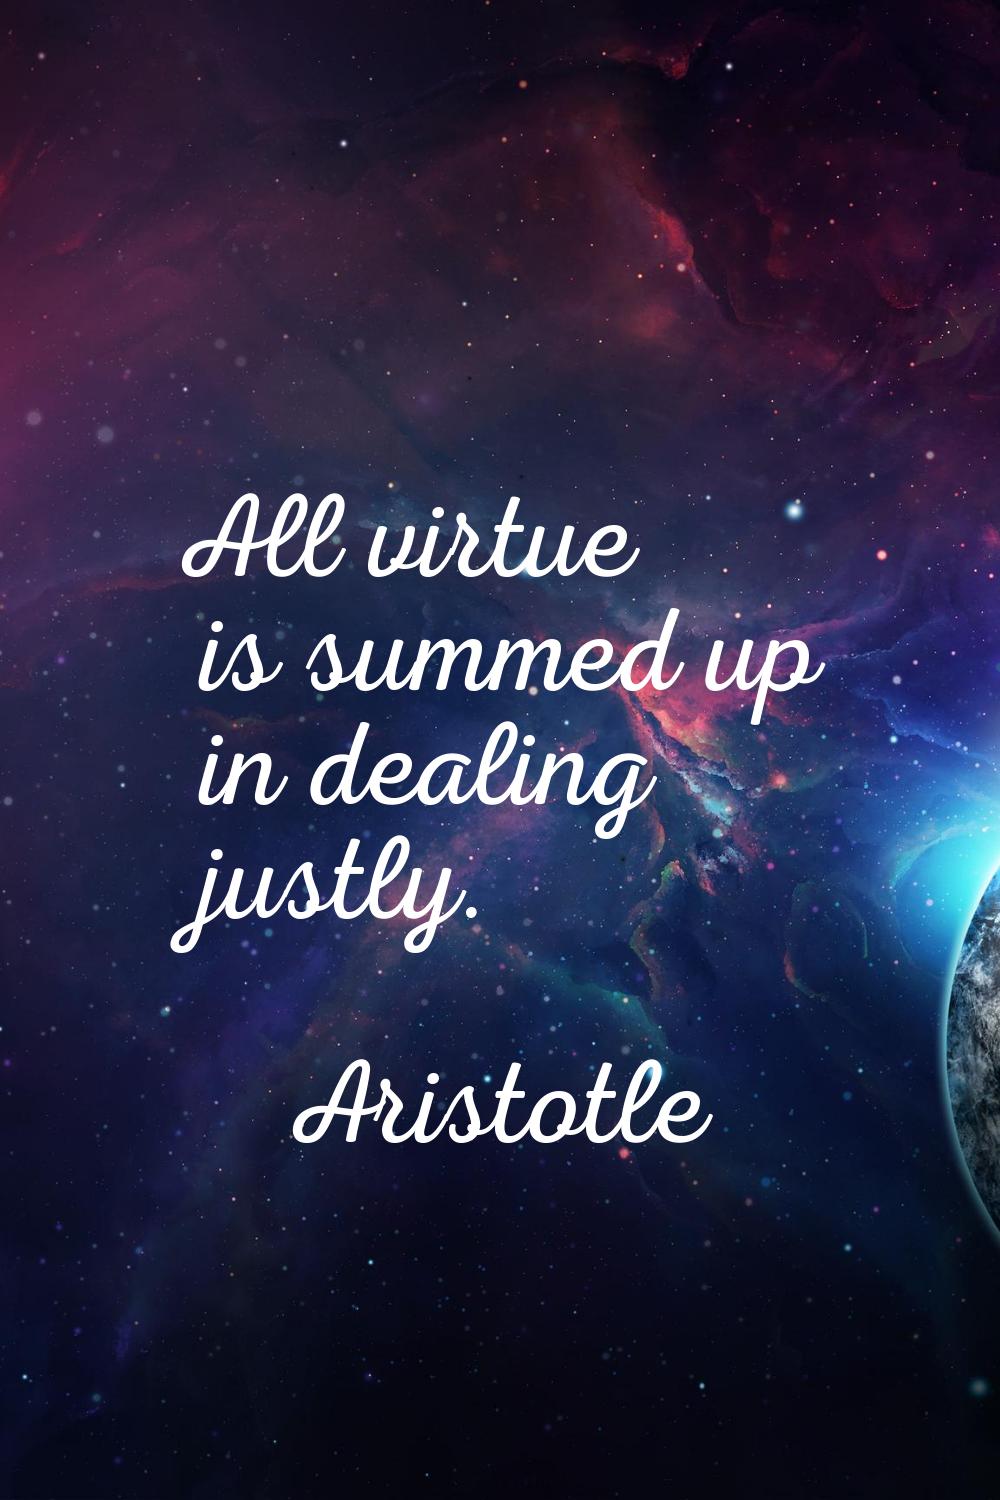 All virtue is summed up in dealing justly.